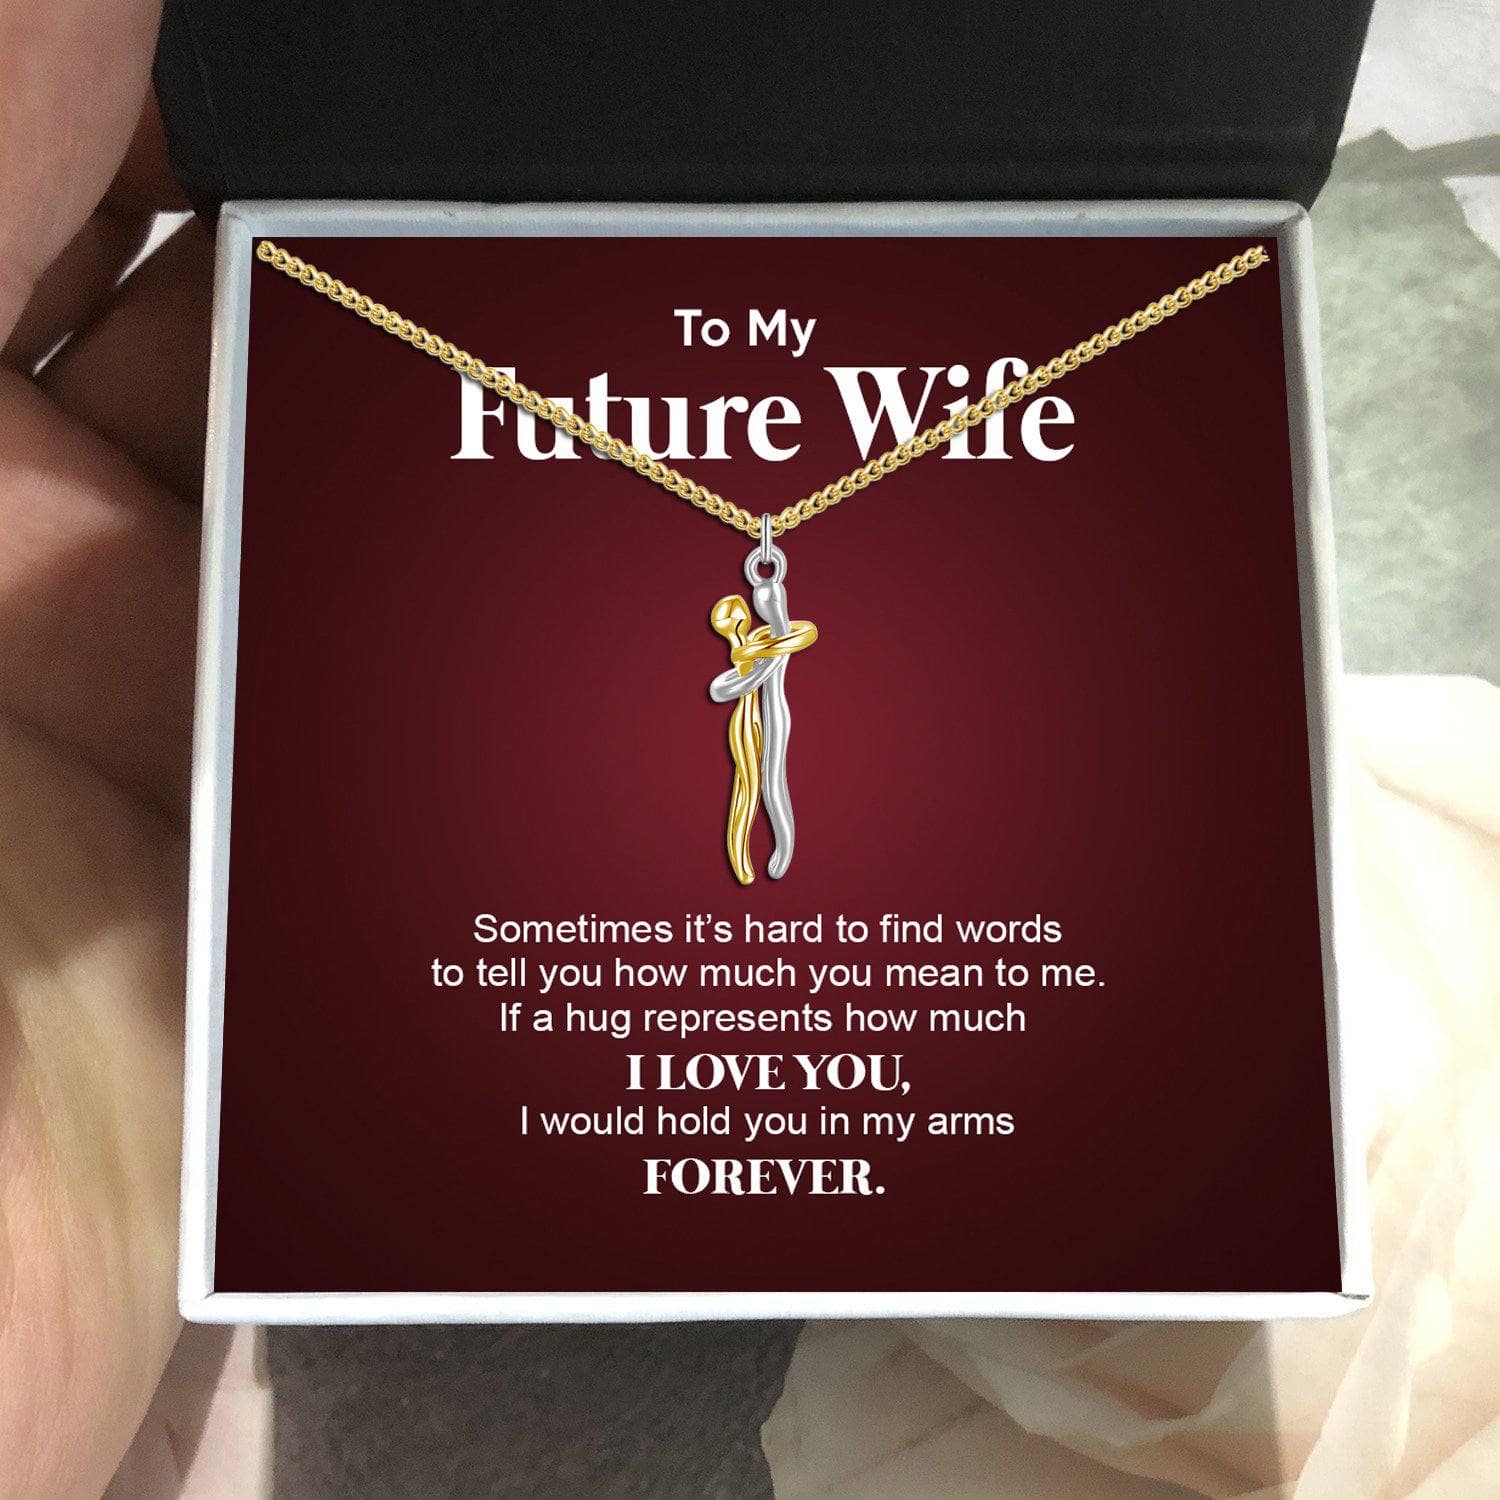 To my Future Wife - Hug Necklace